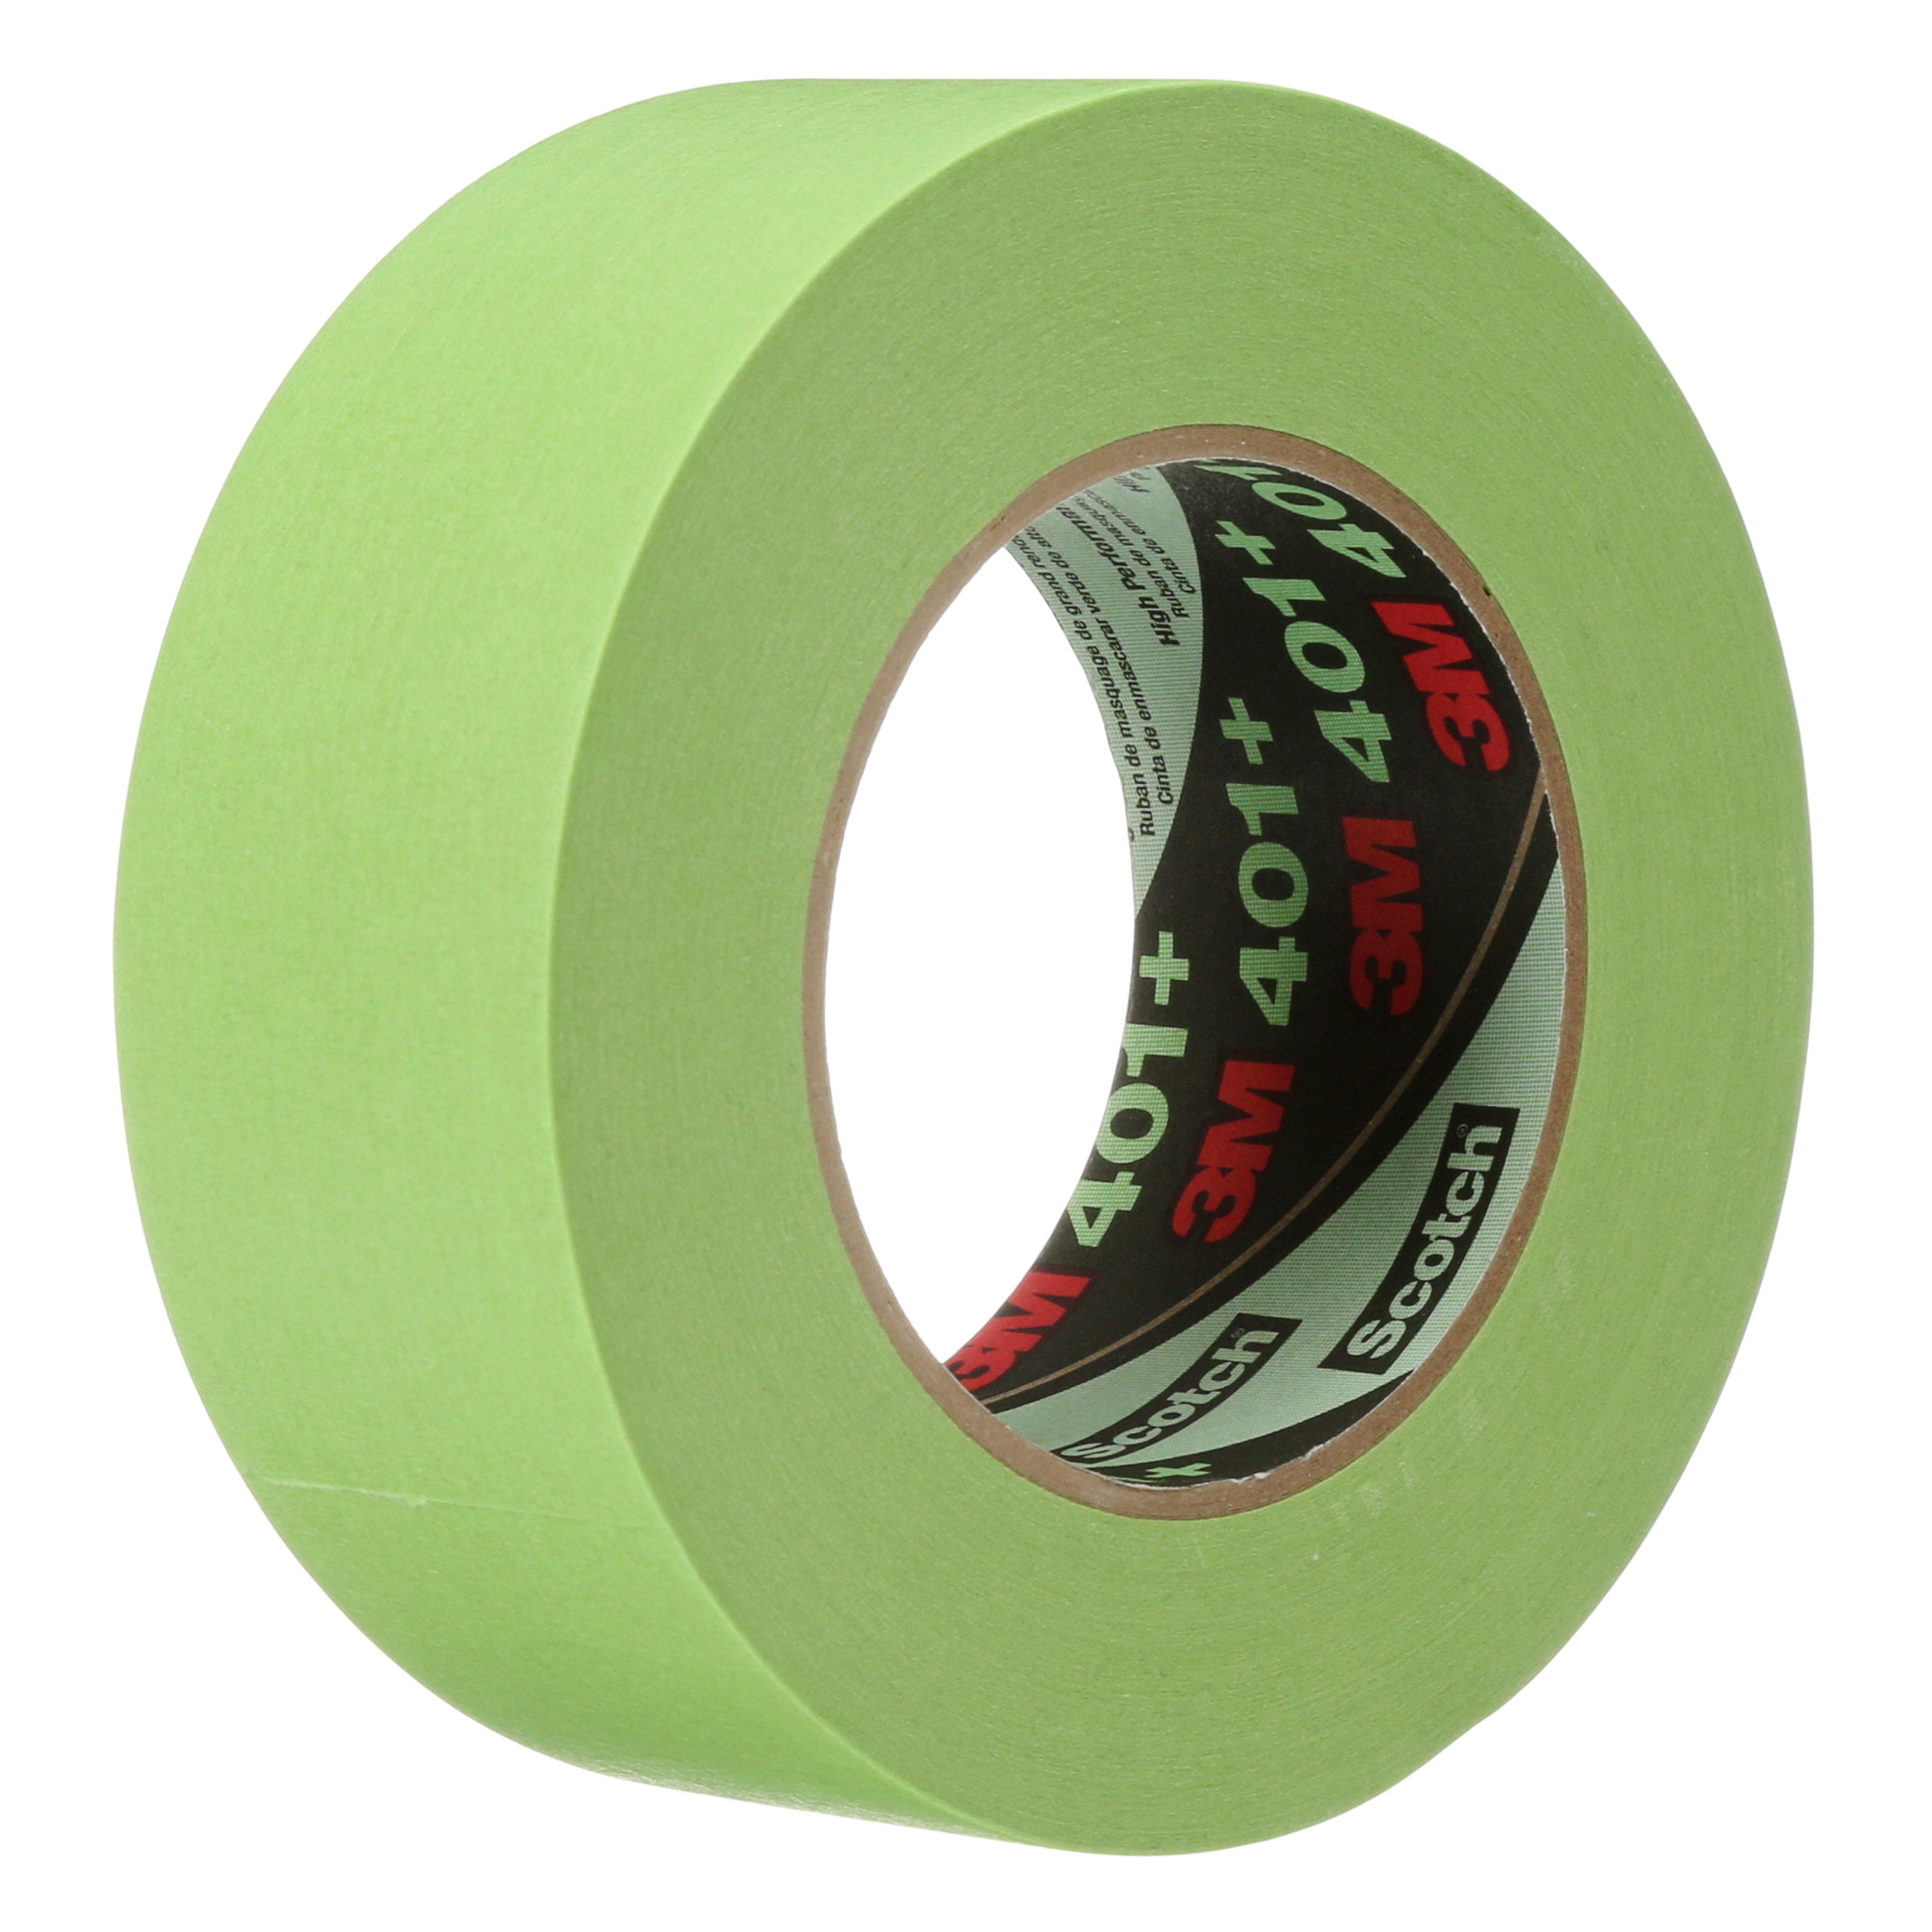 3M™ High Performance Green Masking Tape 401+, 2 in x 60 yd, 12/Case